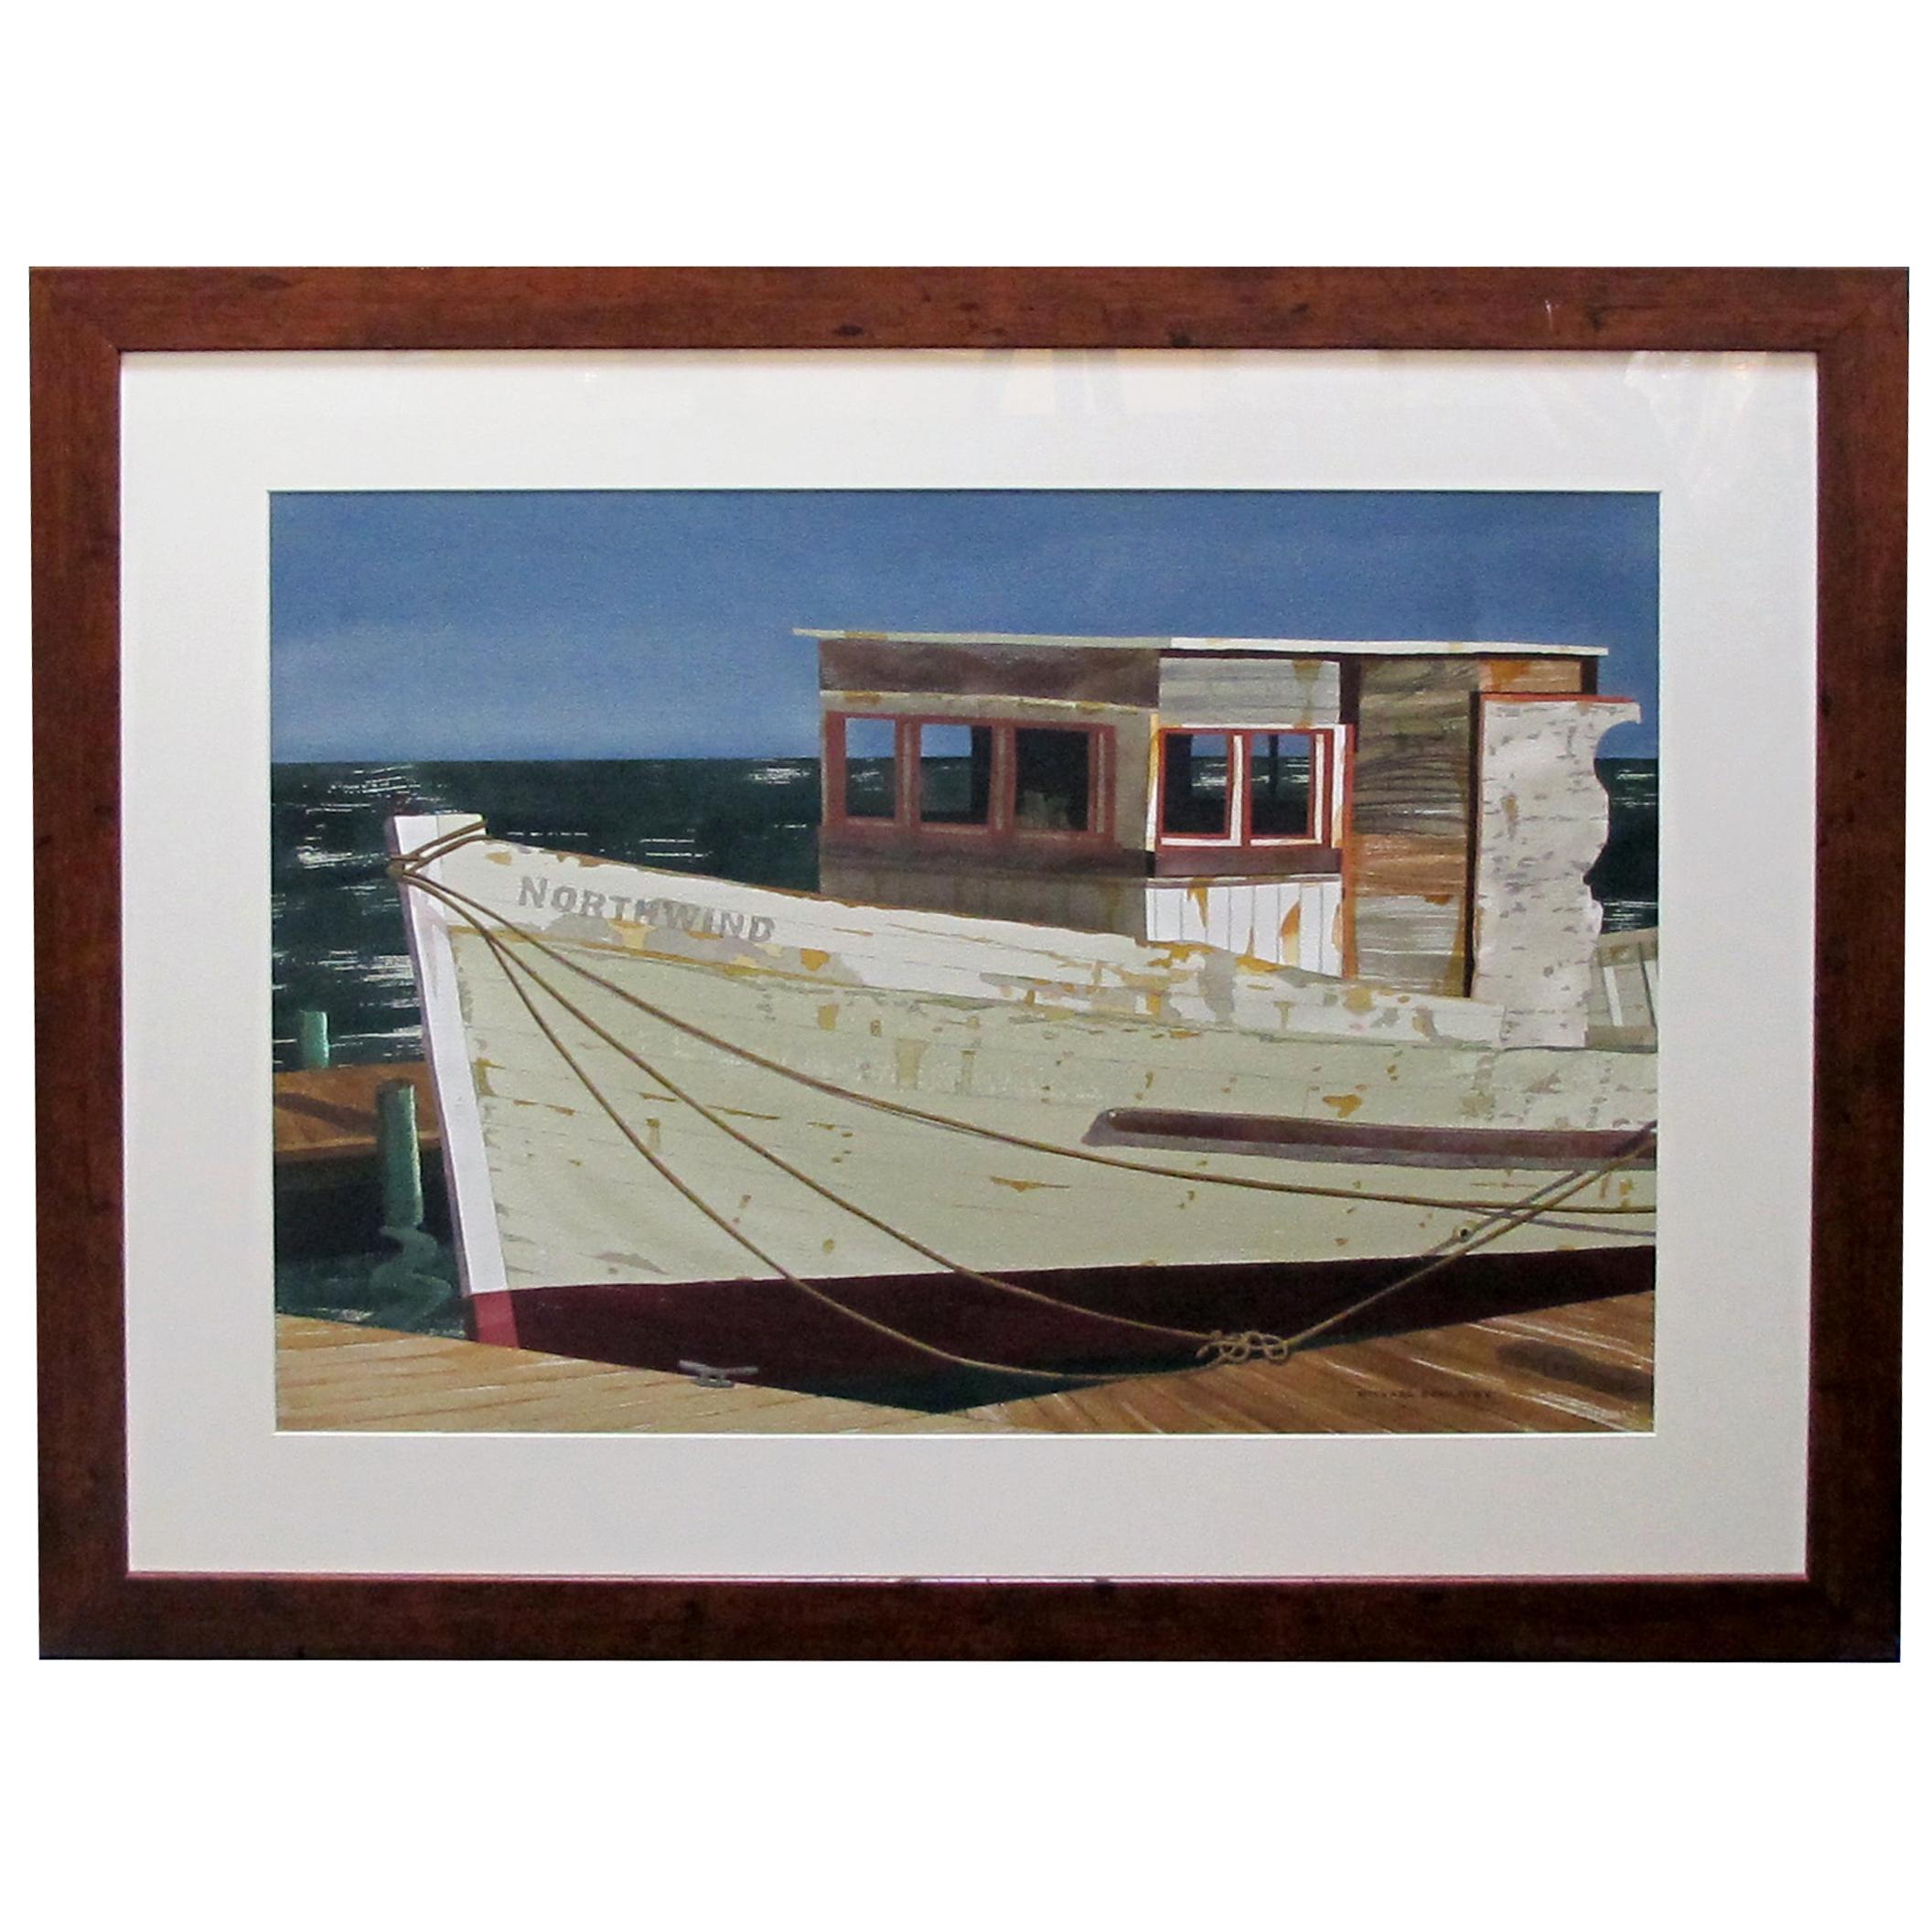 Watercolor on Paper 'Northwind, Bodega Bay, California' by Michael Dunlavey For Sale